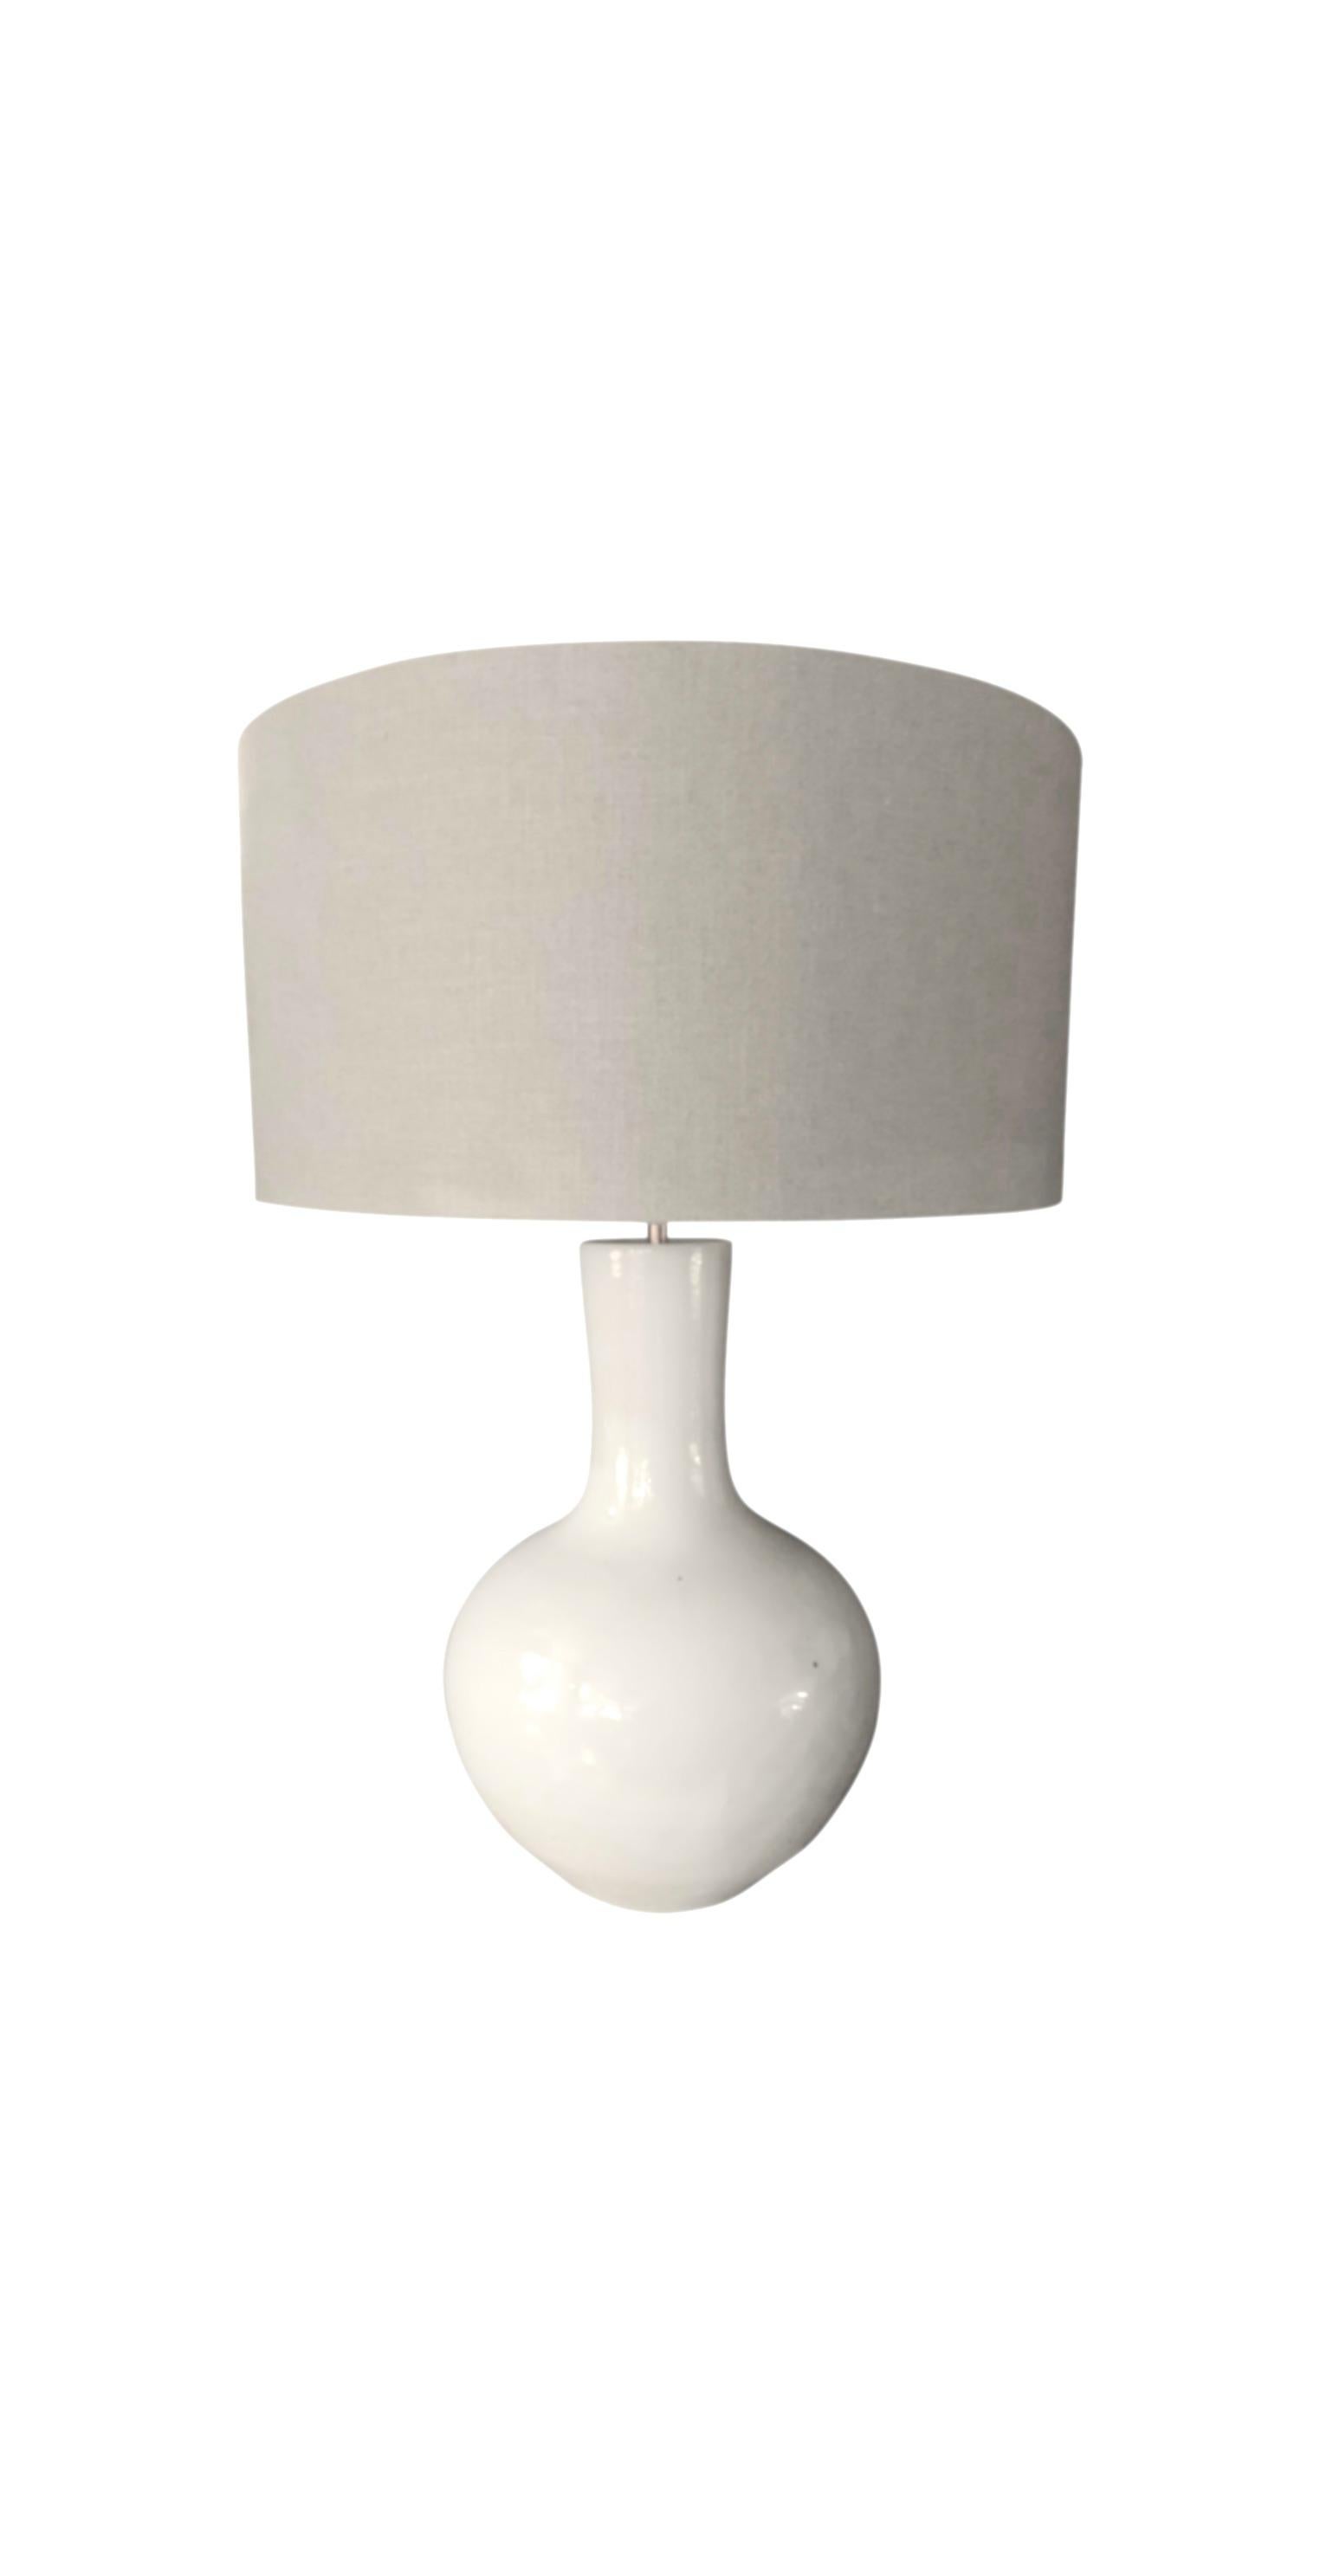 Contemporary Chinese pair extra large white tube neck shaped design lamps.
Linen shades included.
Base diameter 14